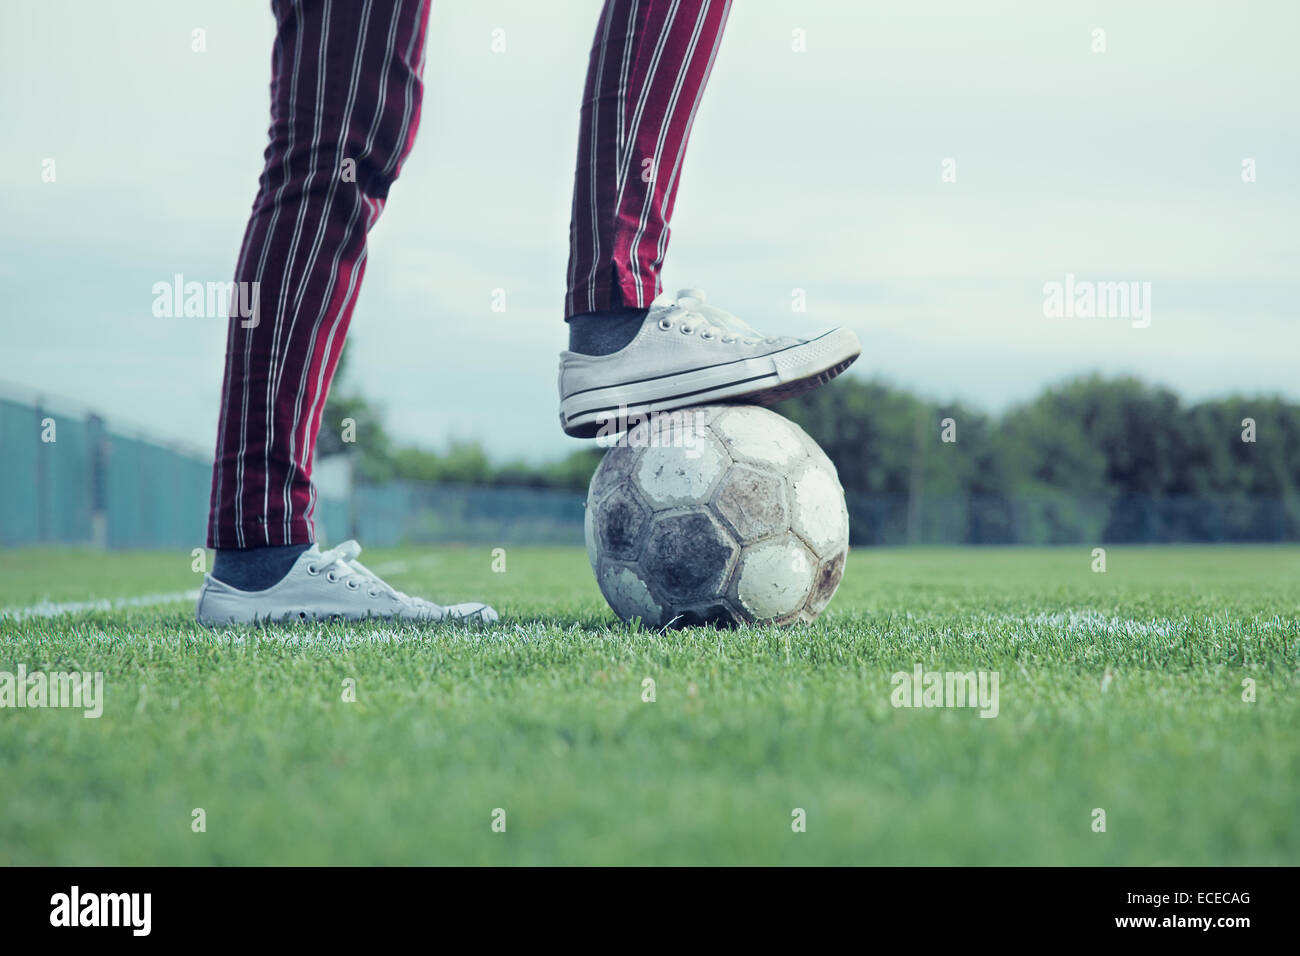 Low section of man with soccer ball Stock Photo